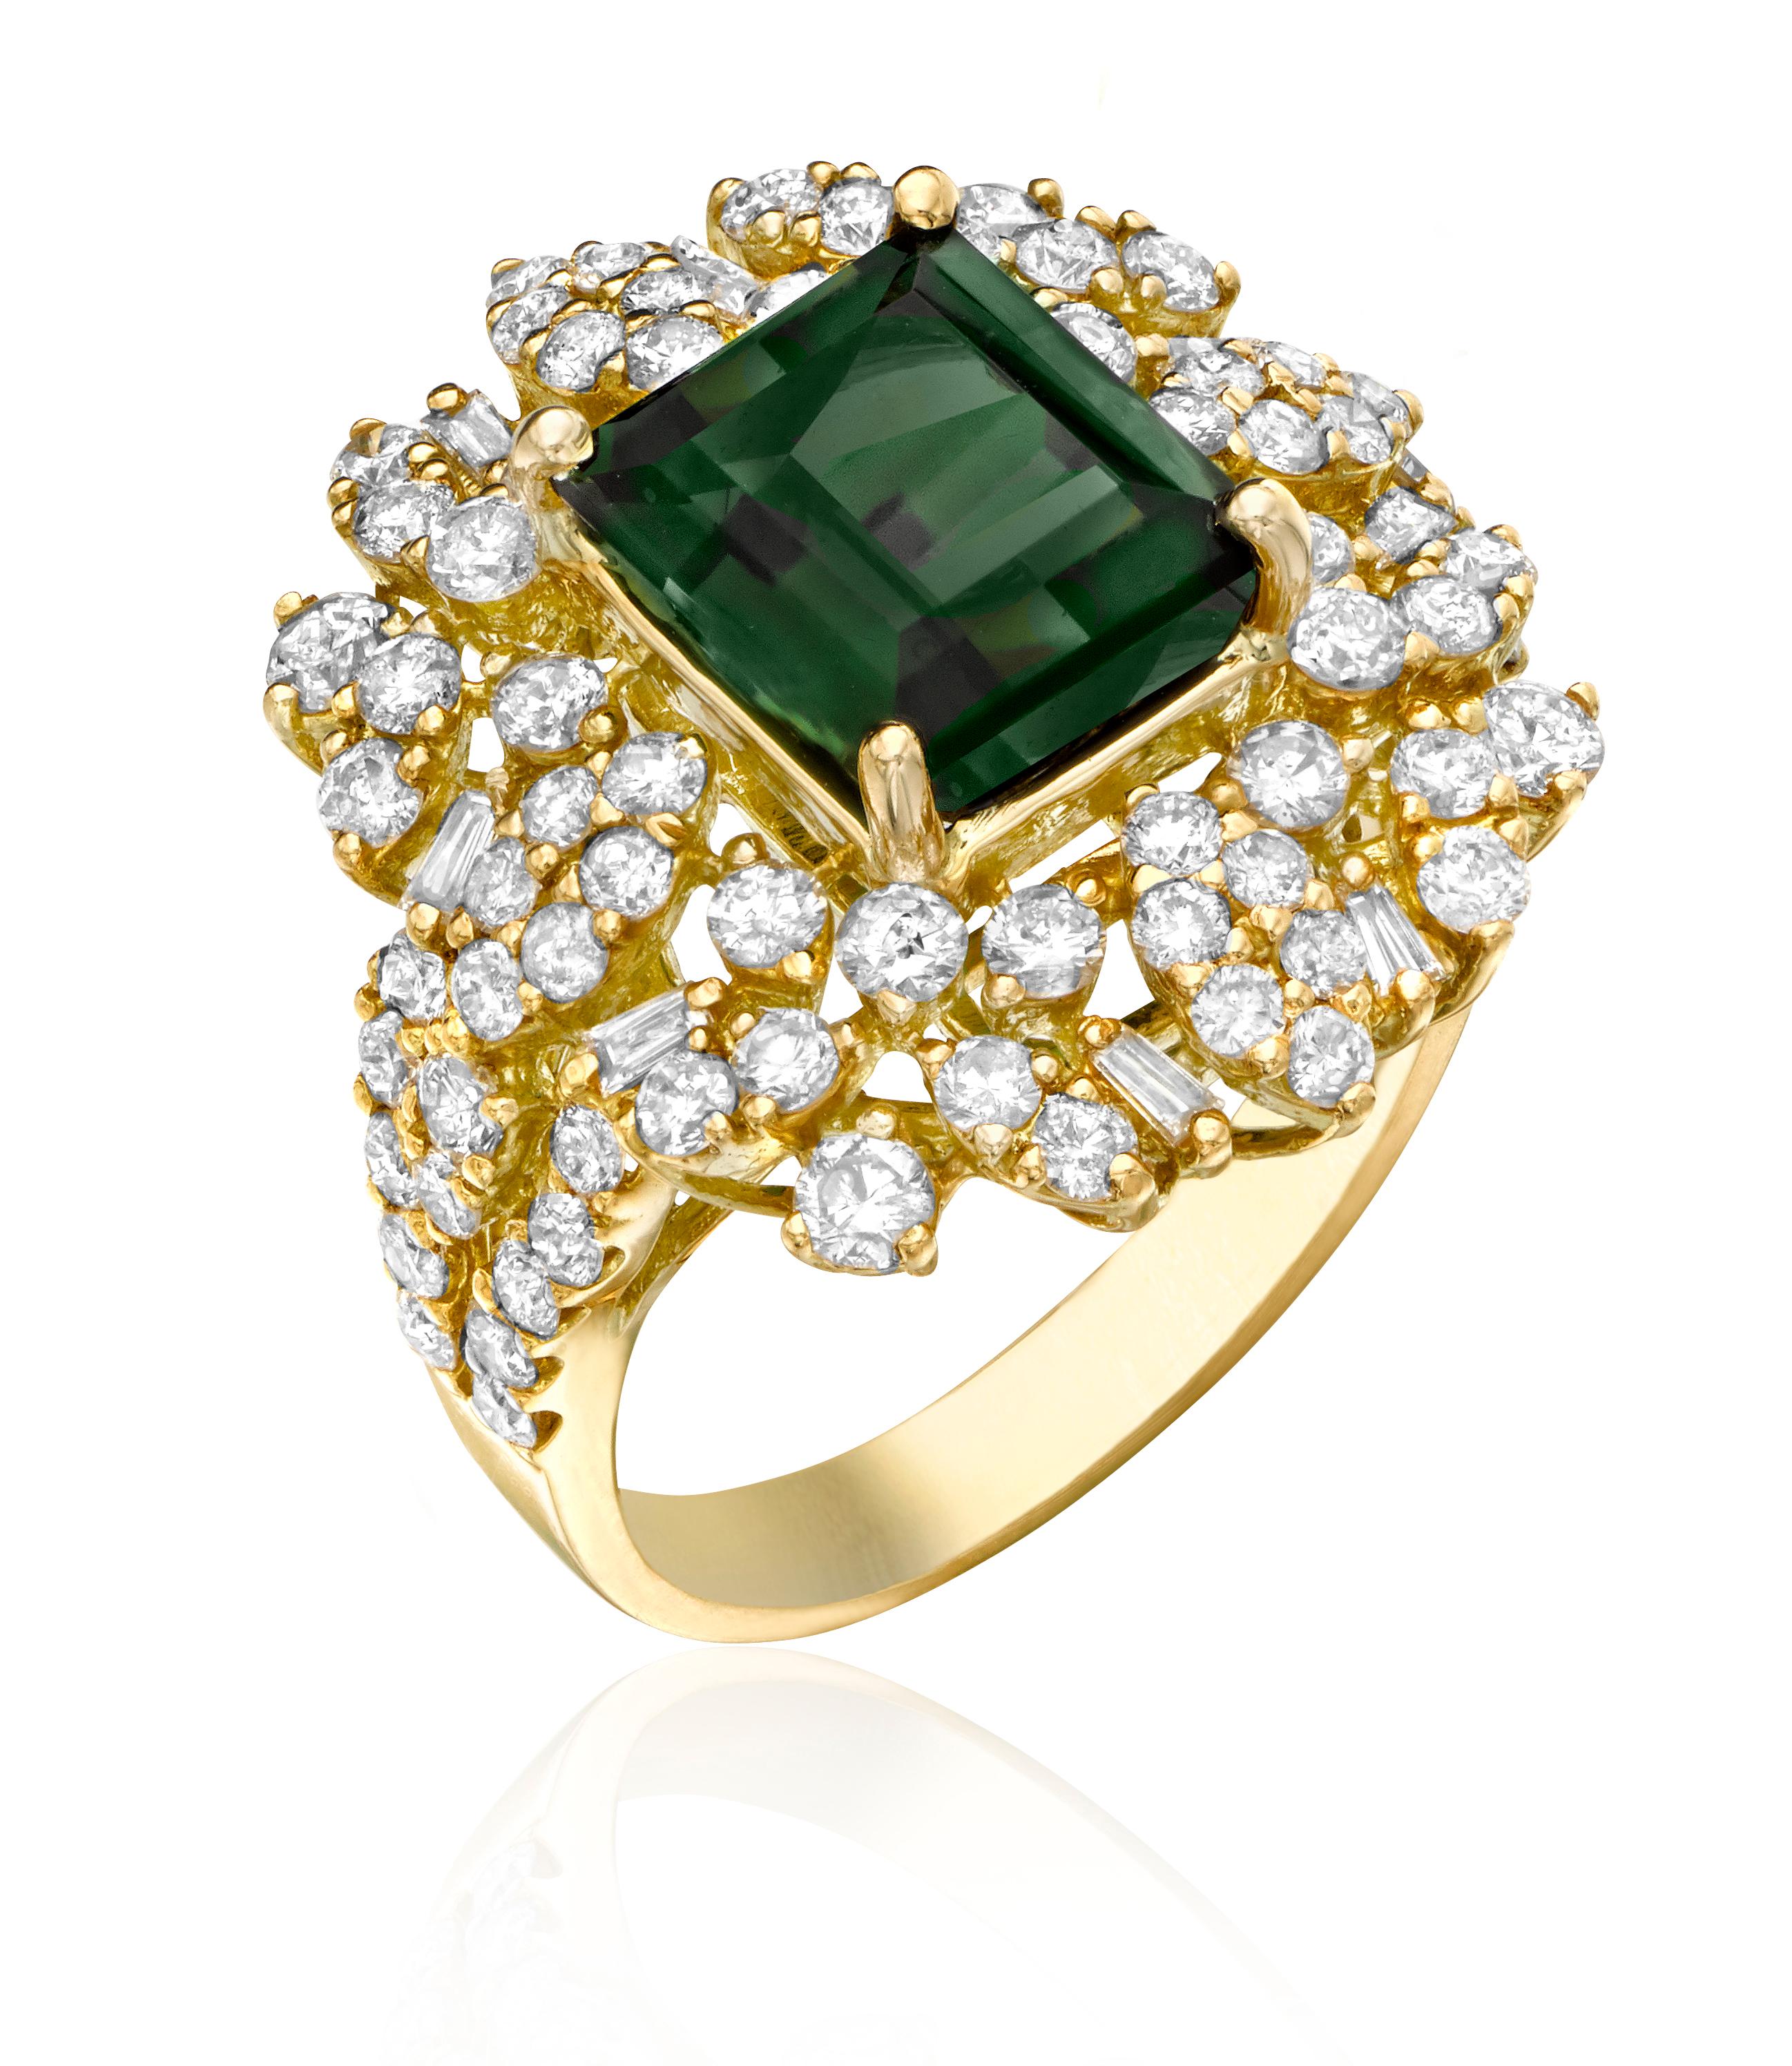 Material: 18k Yellow Gold 
Center Stone Details:  1 Green Tourmaline at 3.76 Carats. Measuring 8.3 x 9.2 mm. 
Mounting Diamond Details: 80 Round White Diamonds Approximately 2.08 Carats - Clarity: VS-SI / Color: H-I. 8 Baguette Diamonds at 0.11